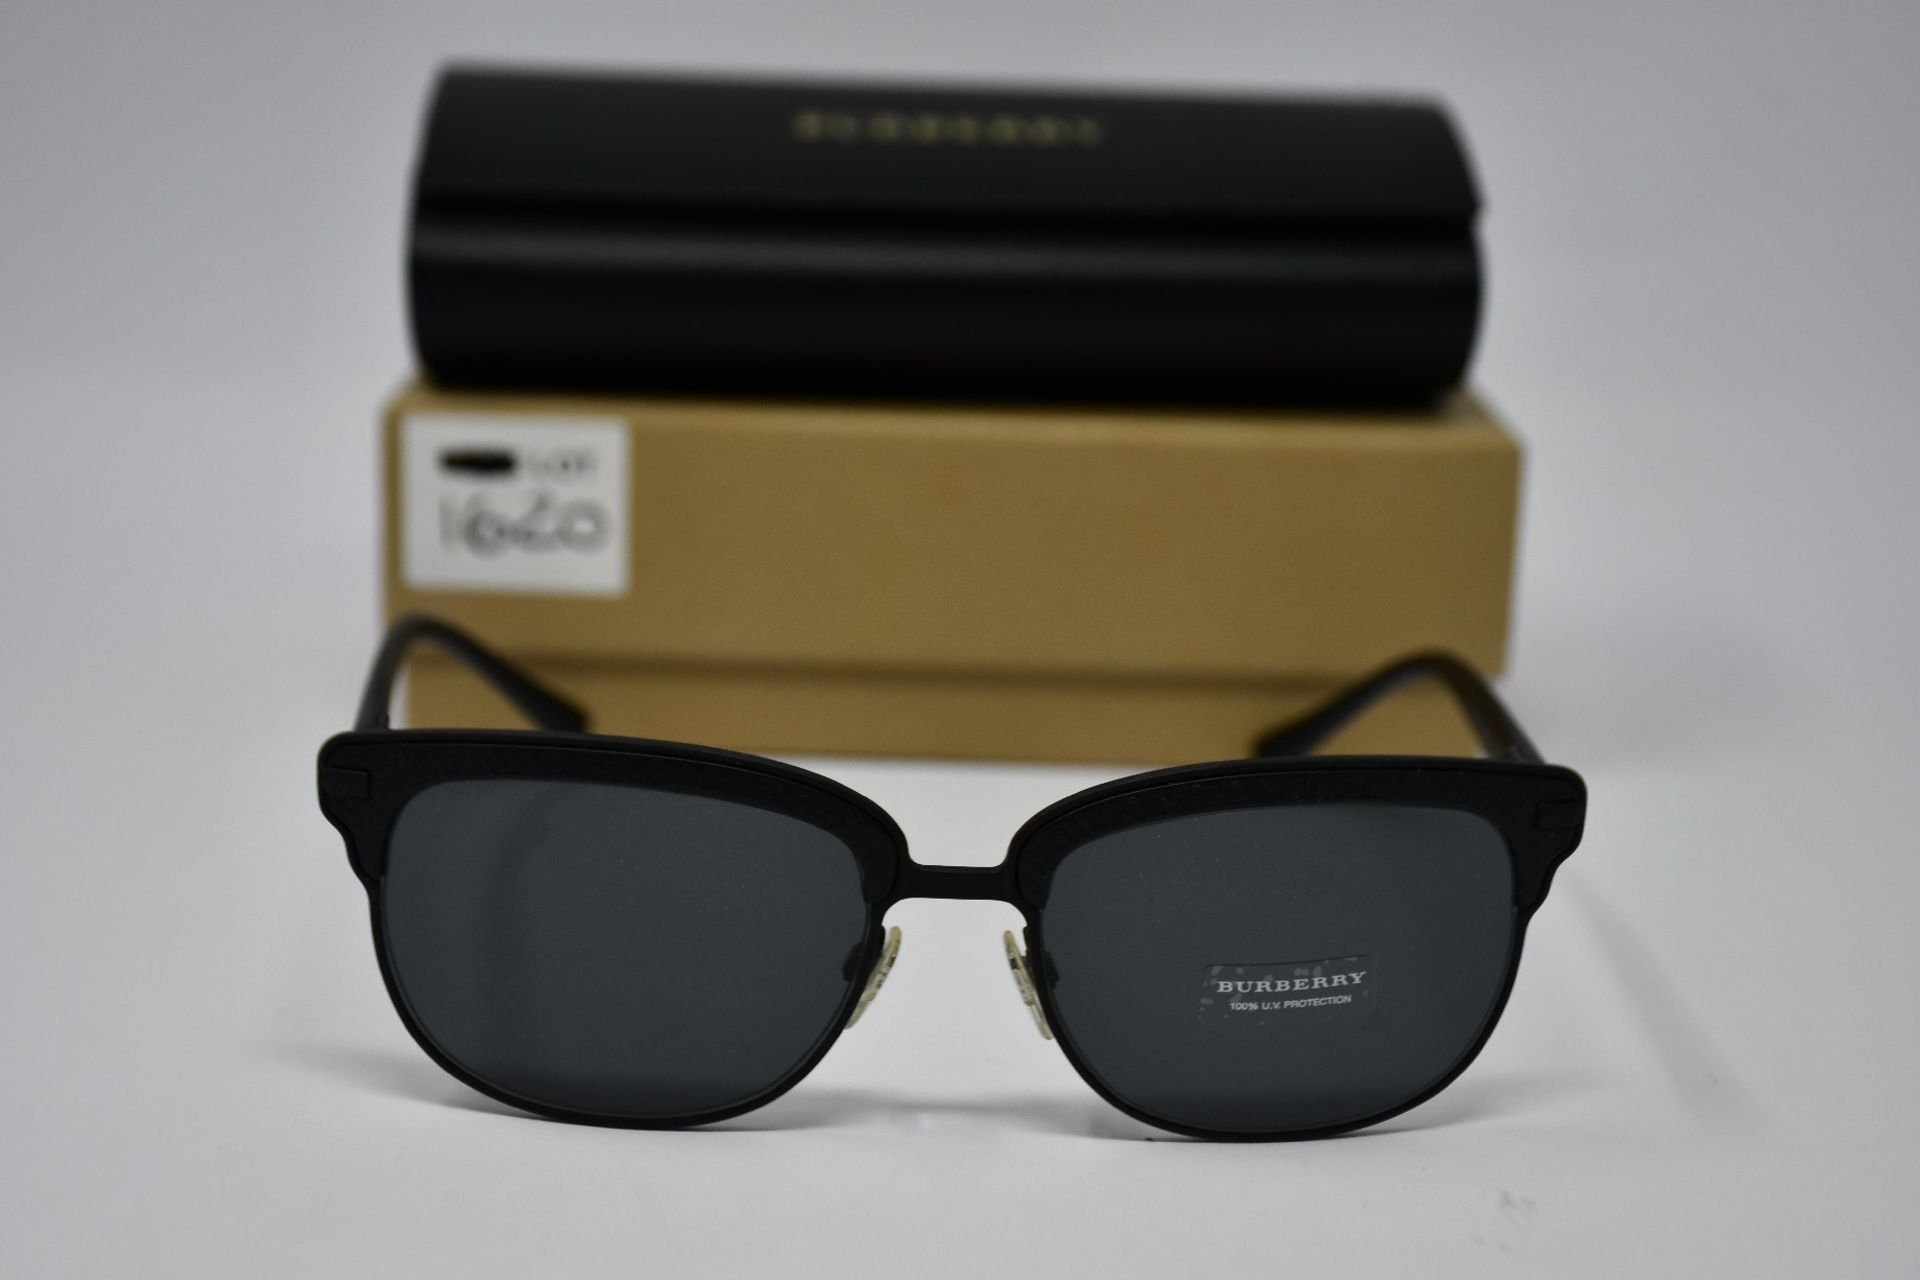 A pair of as new Burberry sunglasses.